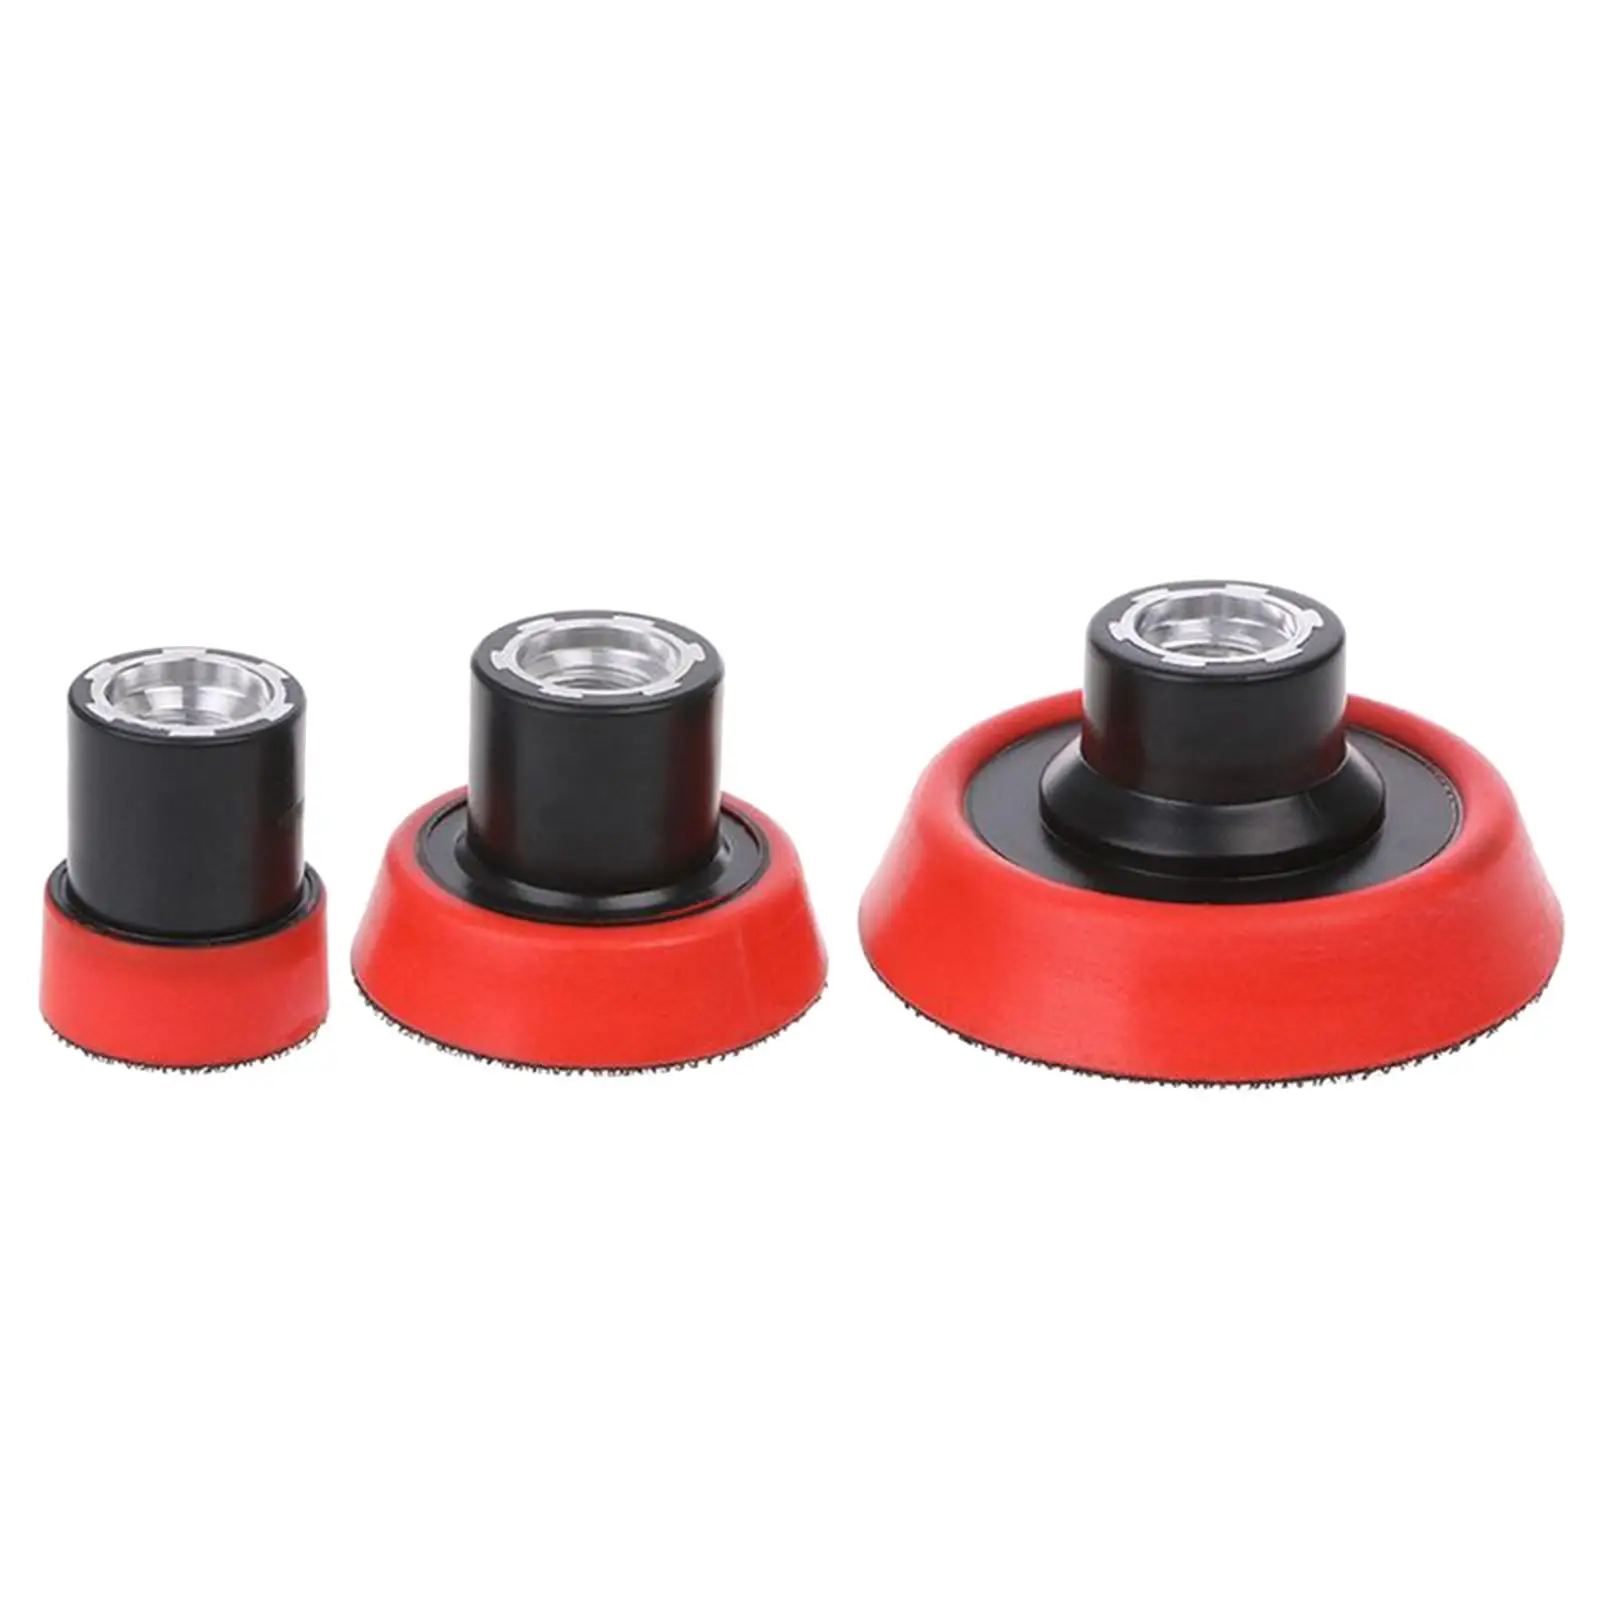 3x Backing   Accessories Durable Set Tools Buffering Backer Polisher M14